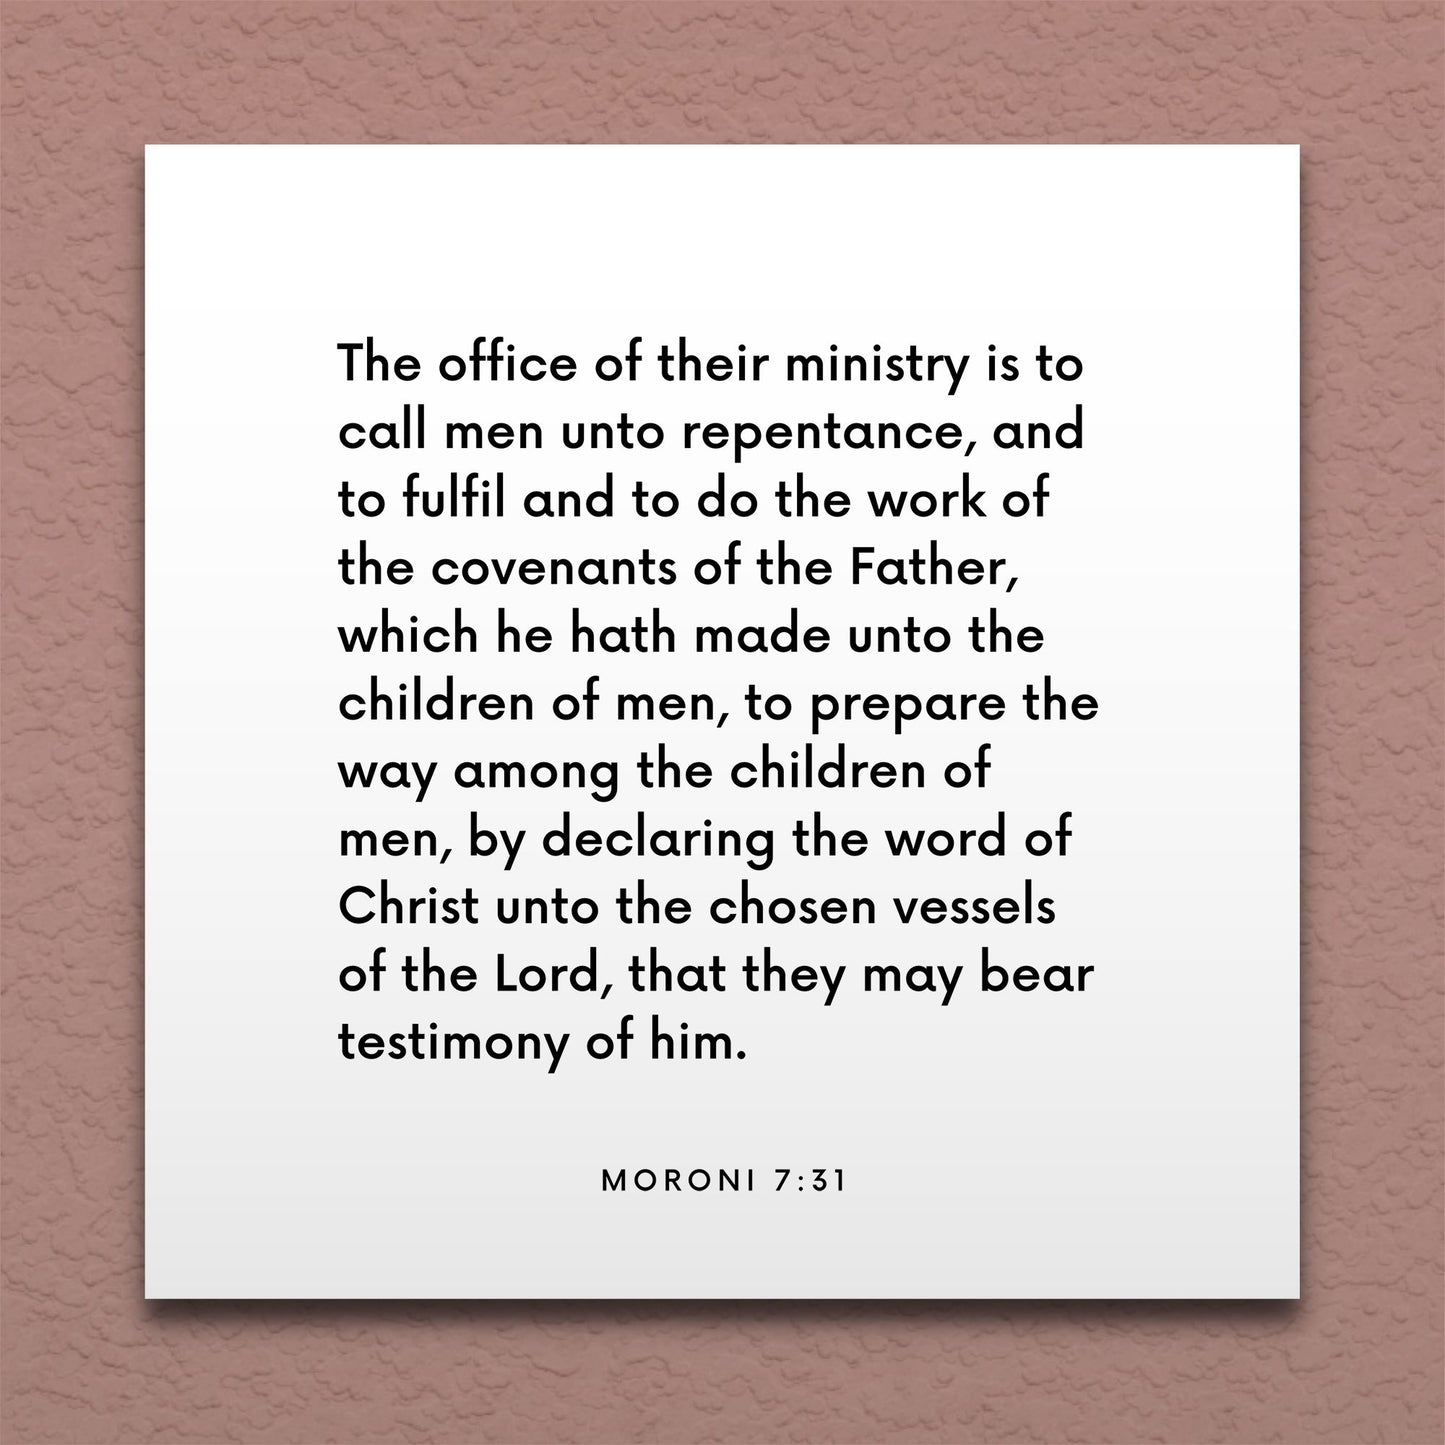 Wall-mounted scripture tile for Moroni 7:31 - "The office of their ministry is to call men unto repentance"